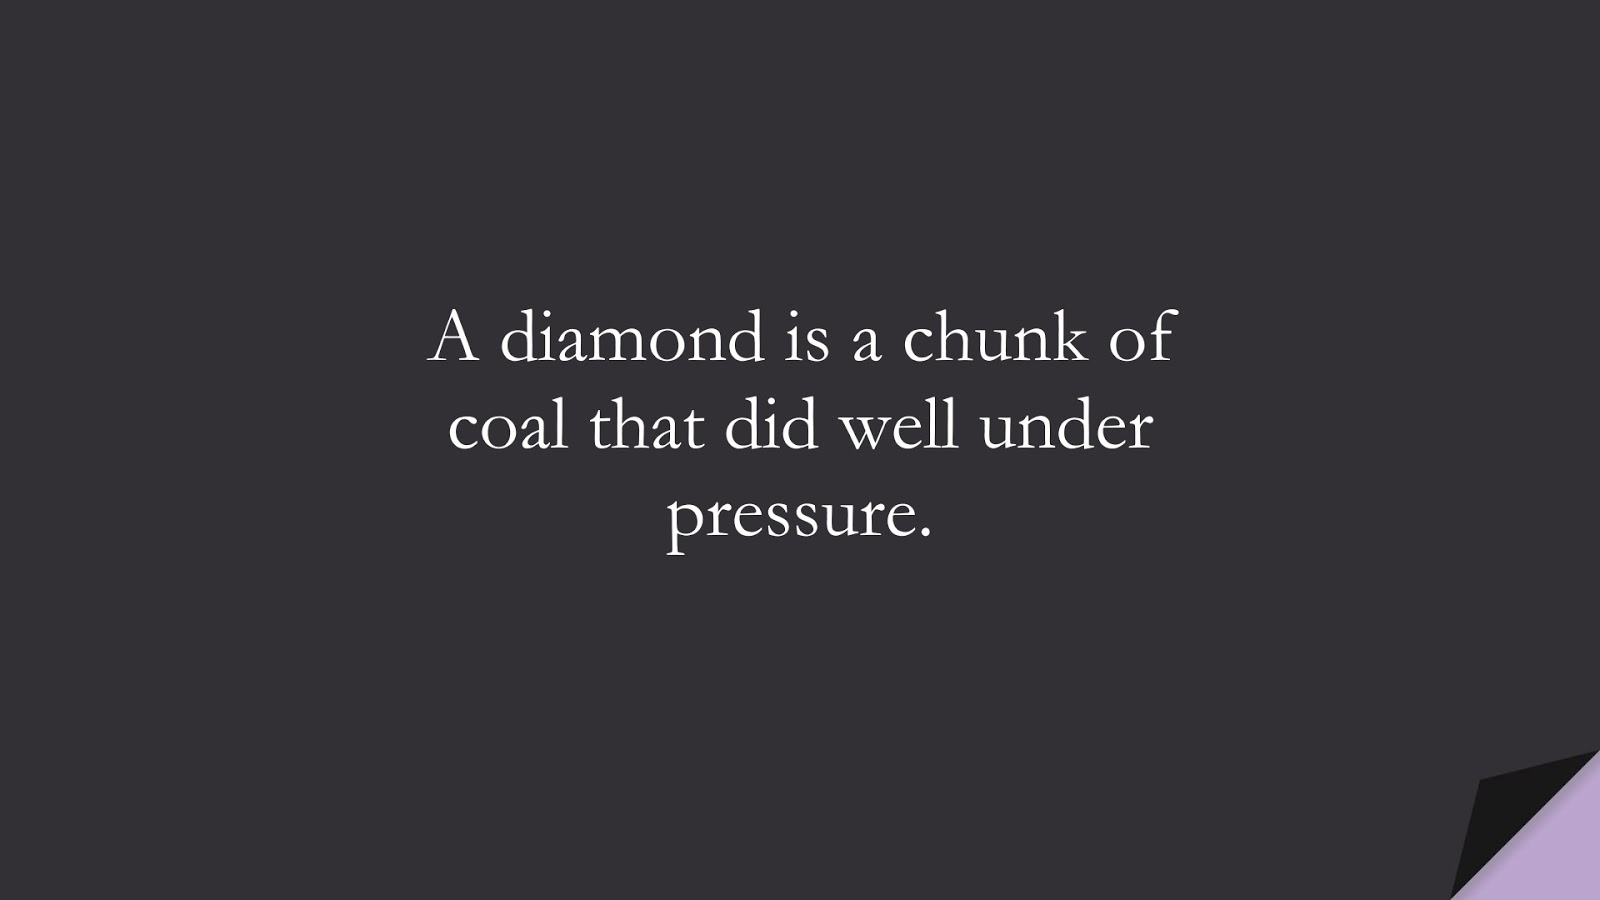 A diamond is a chunk of coal that did well under pressure.FALSE